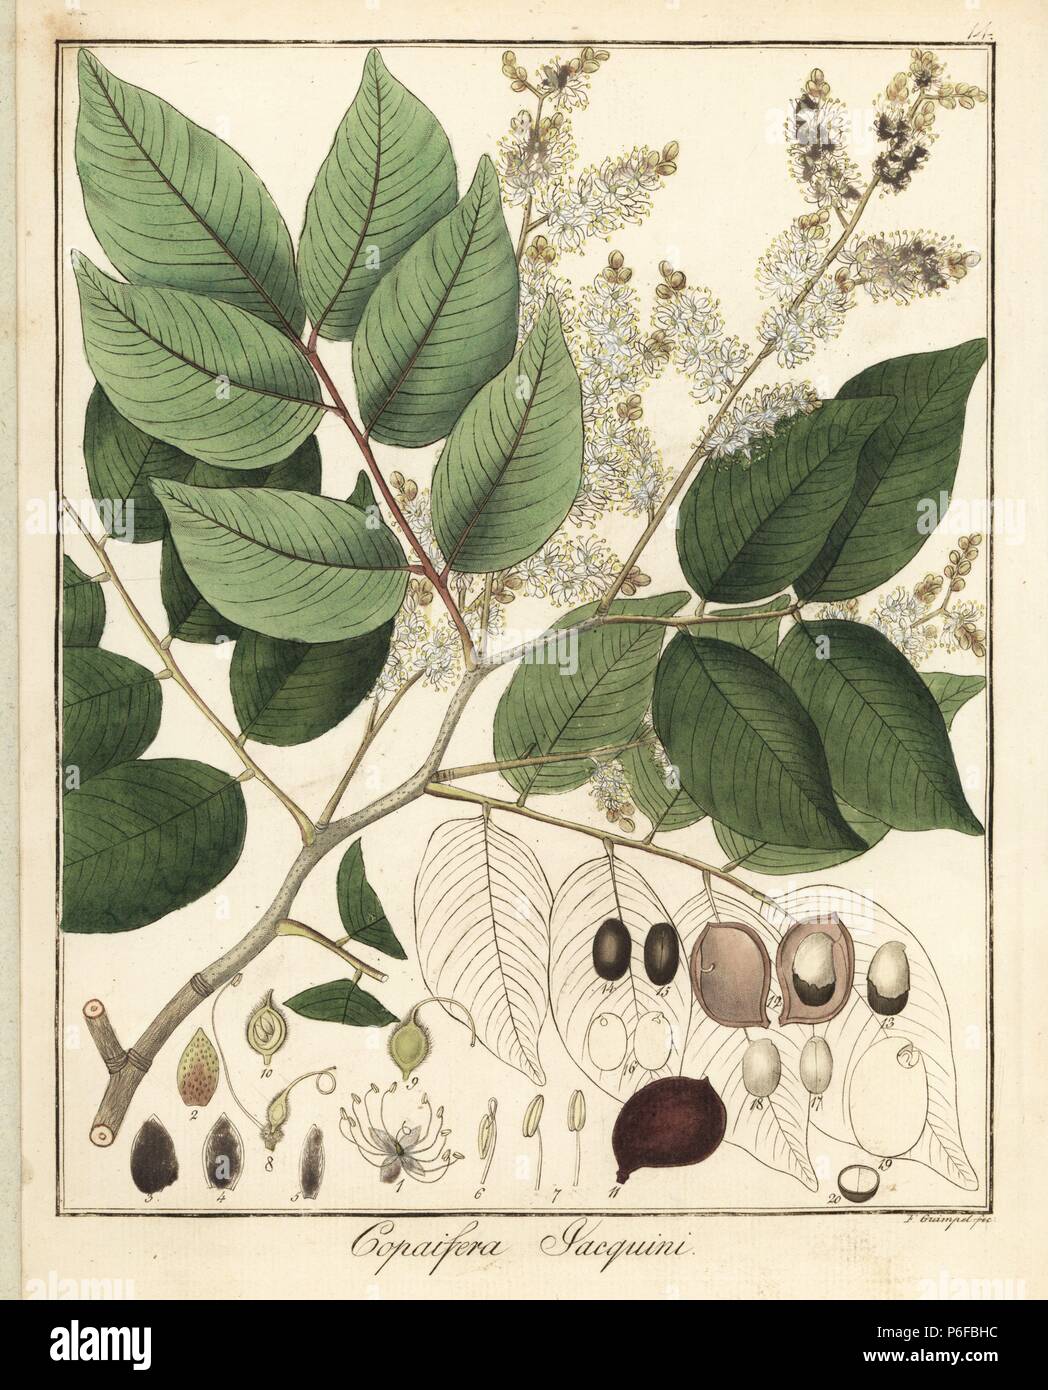 Copal or copaiba tree, Copaifera jacquinii. Handcoloured copperplate engraving by F. Guimpel from Dr. Friedrich Gottlob Hayne's Medical Botany, Berlin, 1822. Hayne (1763-1832) was a German botanist, apothecary and professor of pharmaceutical botany at Berlin University. Stock Photo